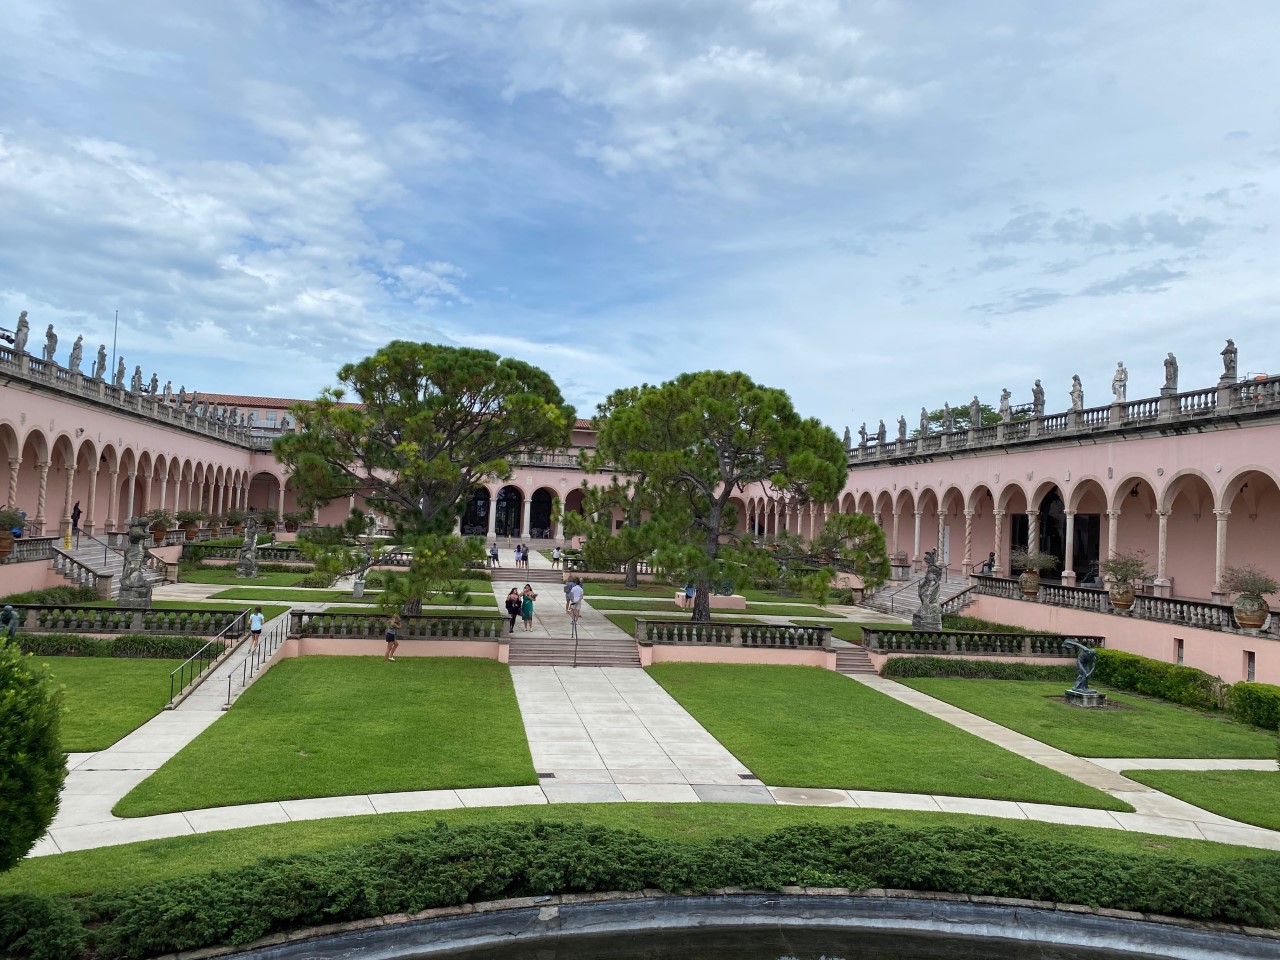 The Ringling Museum of Art Courtyard has a variety of ancient statues.